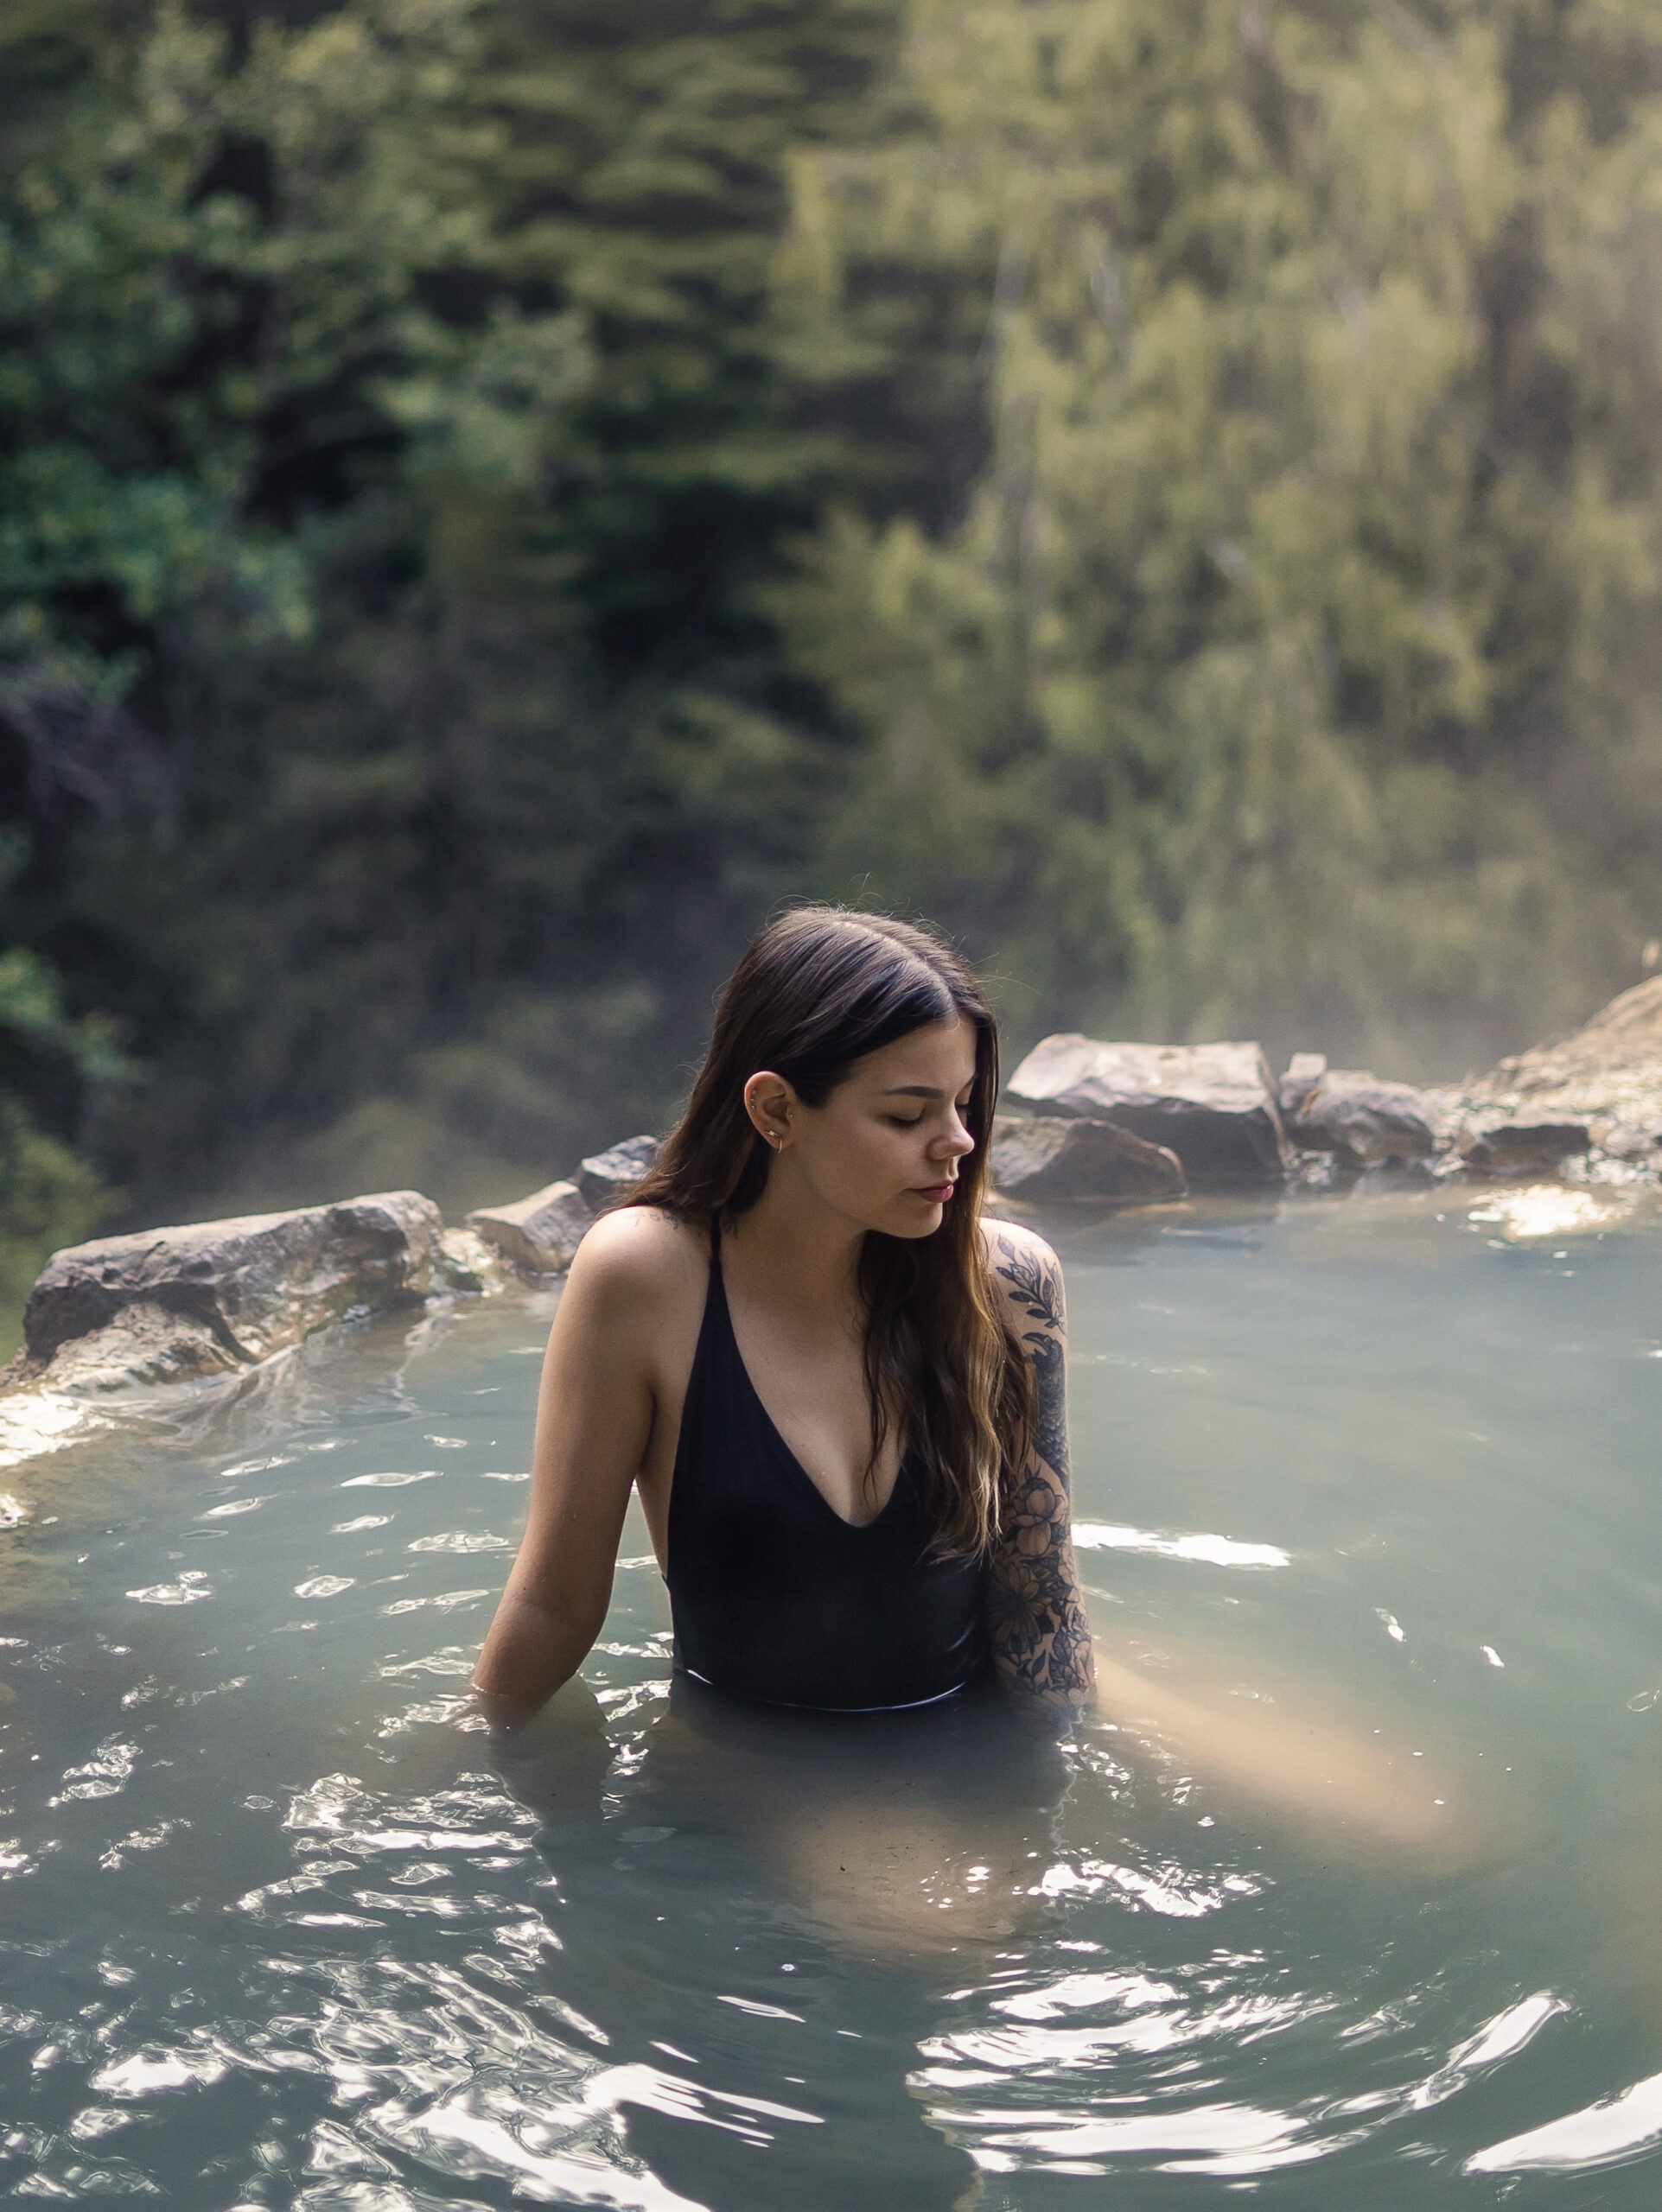 people travel to escape - hot springs in oregon